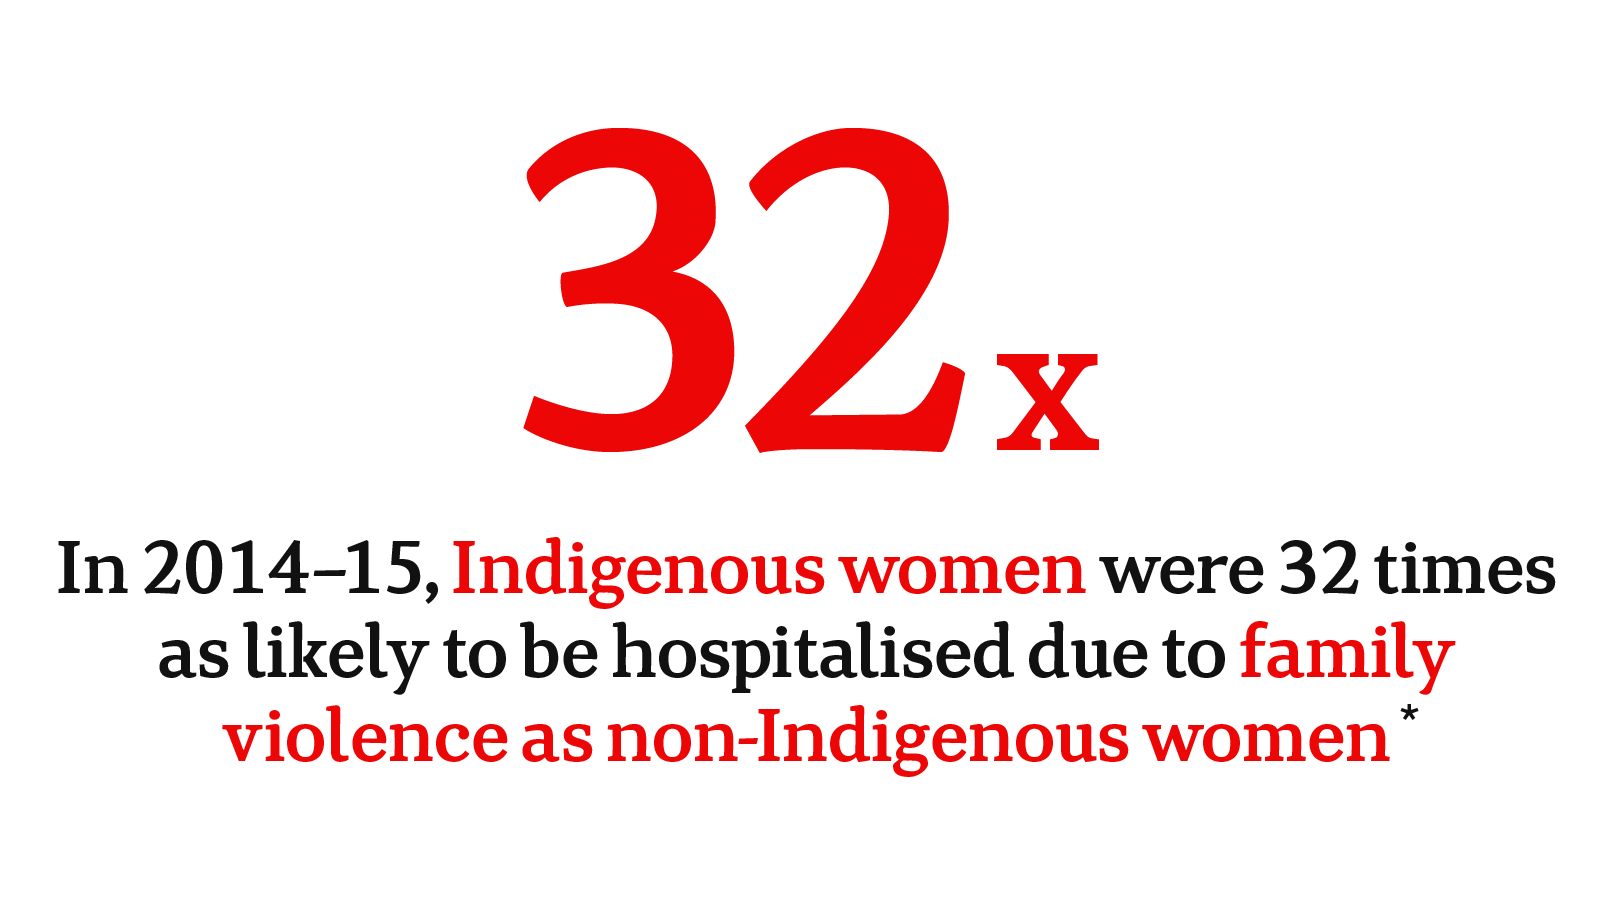 2014-15 Indigenous women were 32 times more likely to be hospitalised due to family violence as non-indigenous women.